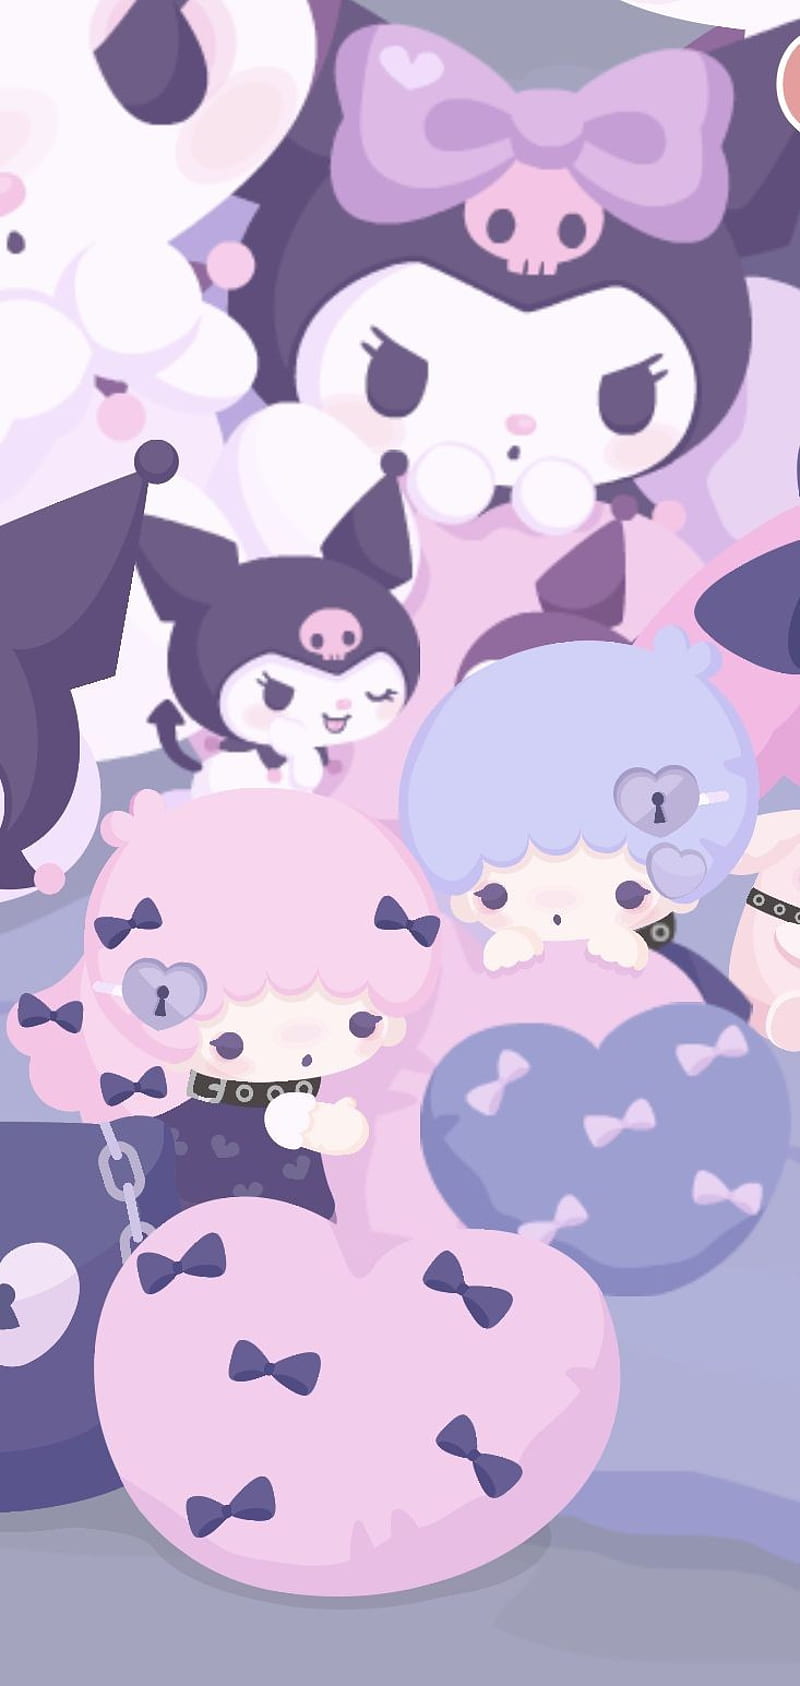 A group of Sanrio characters including Kuromi, My Melody, and Little Twin Stars. - Kuromi